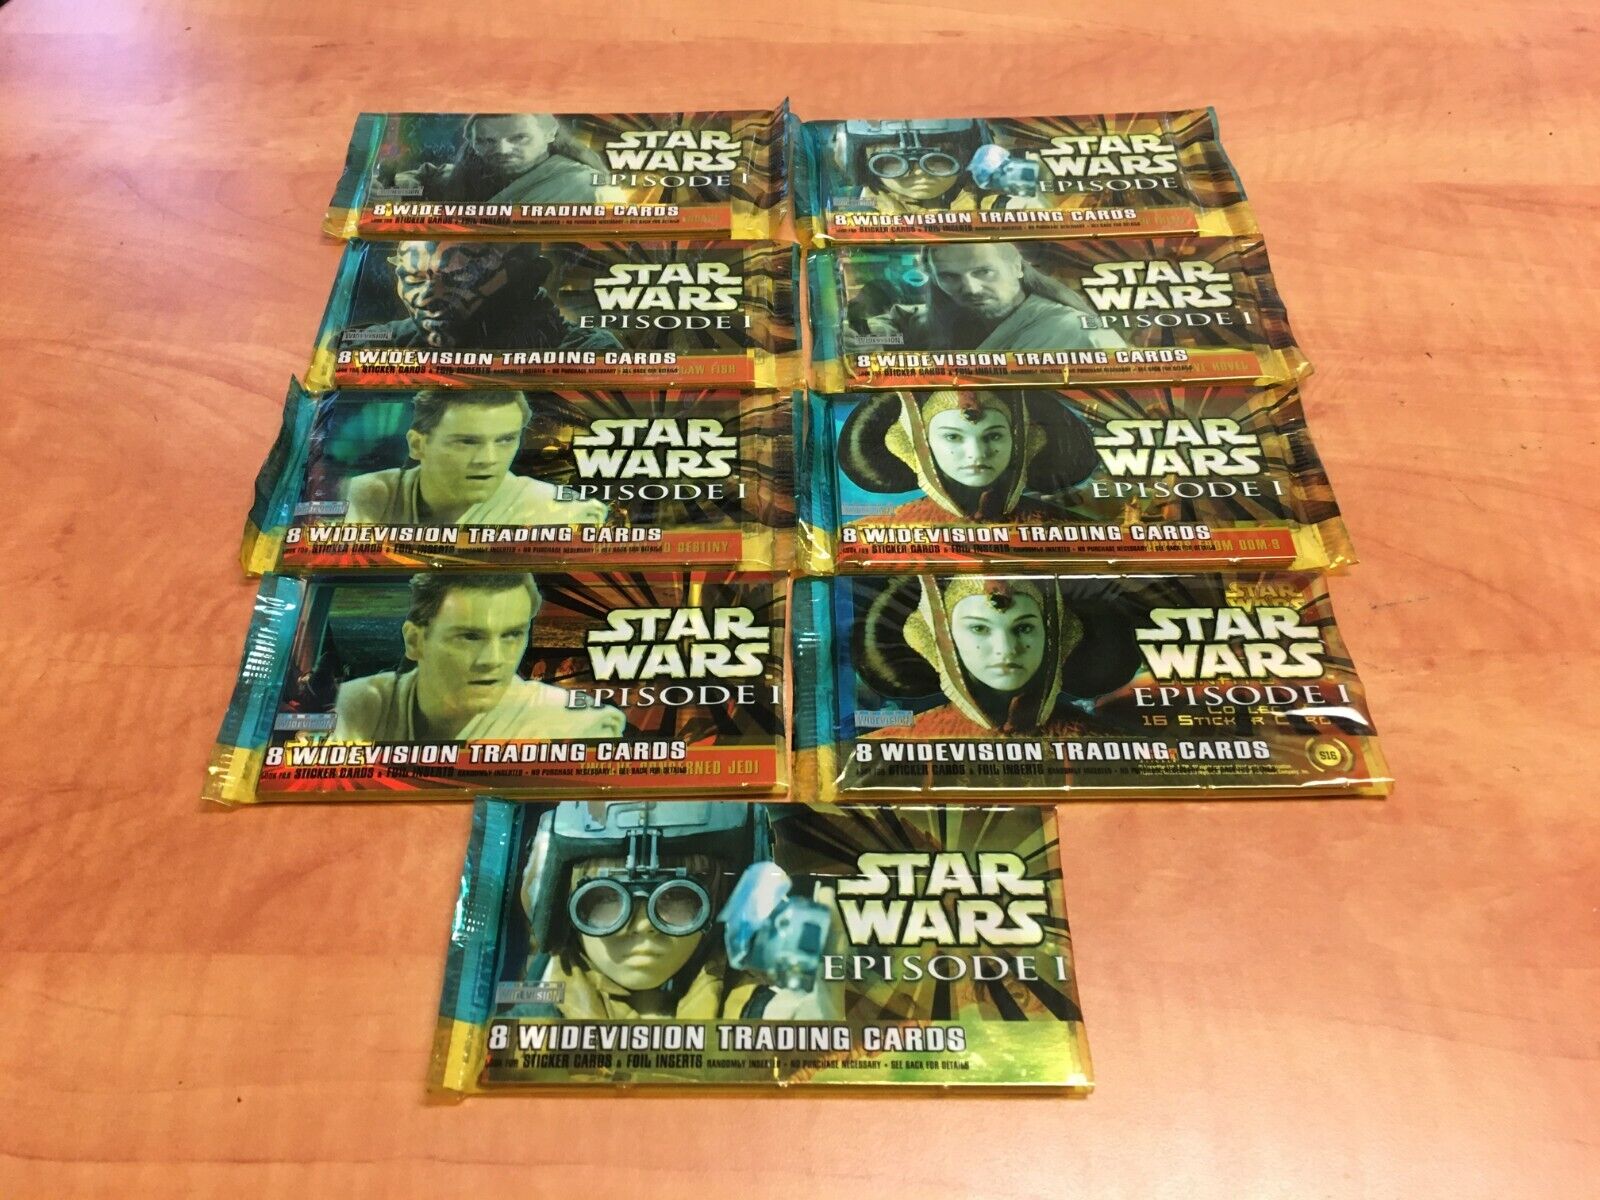 Lot of 9 Star Wars Episode I Wide Vision Trading Cards Topps 1999 READ